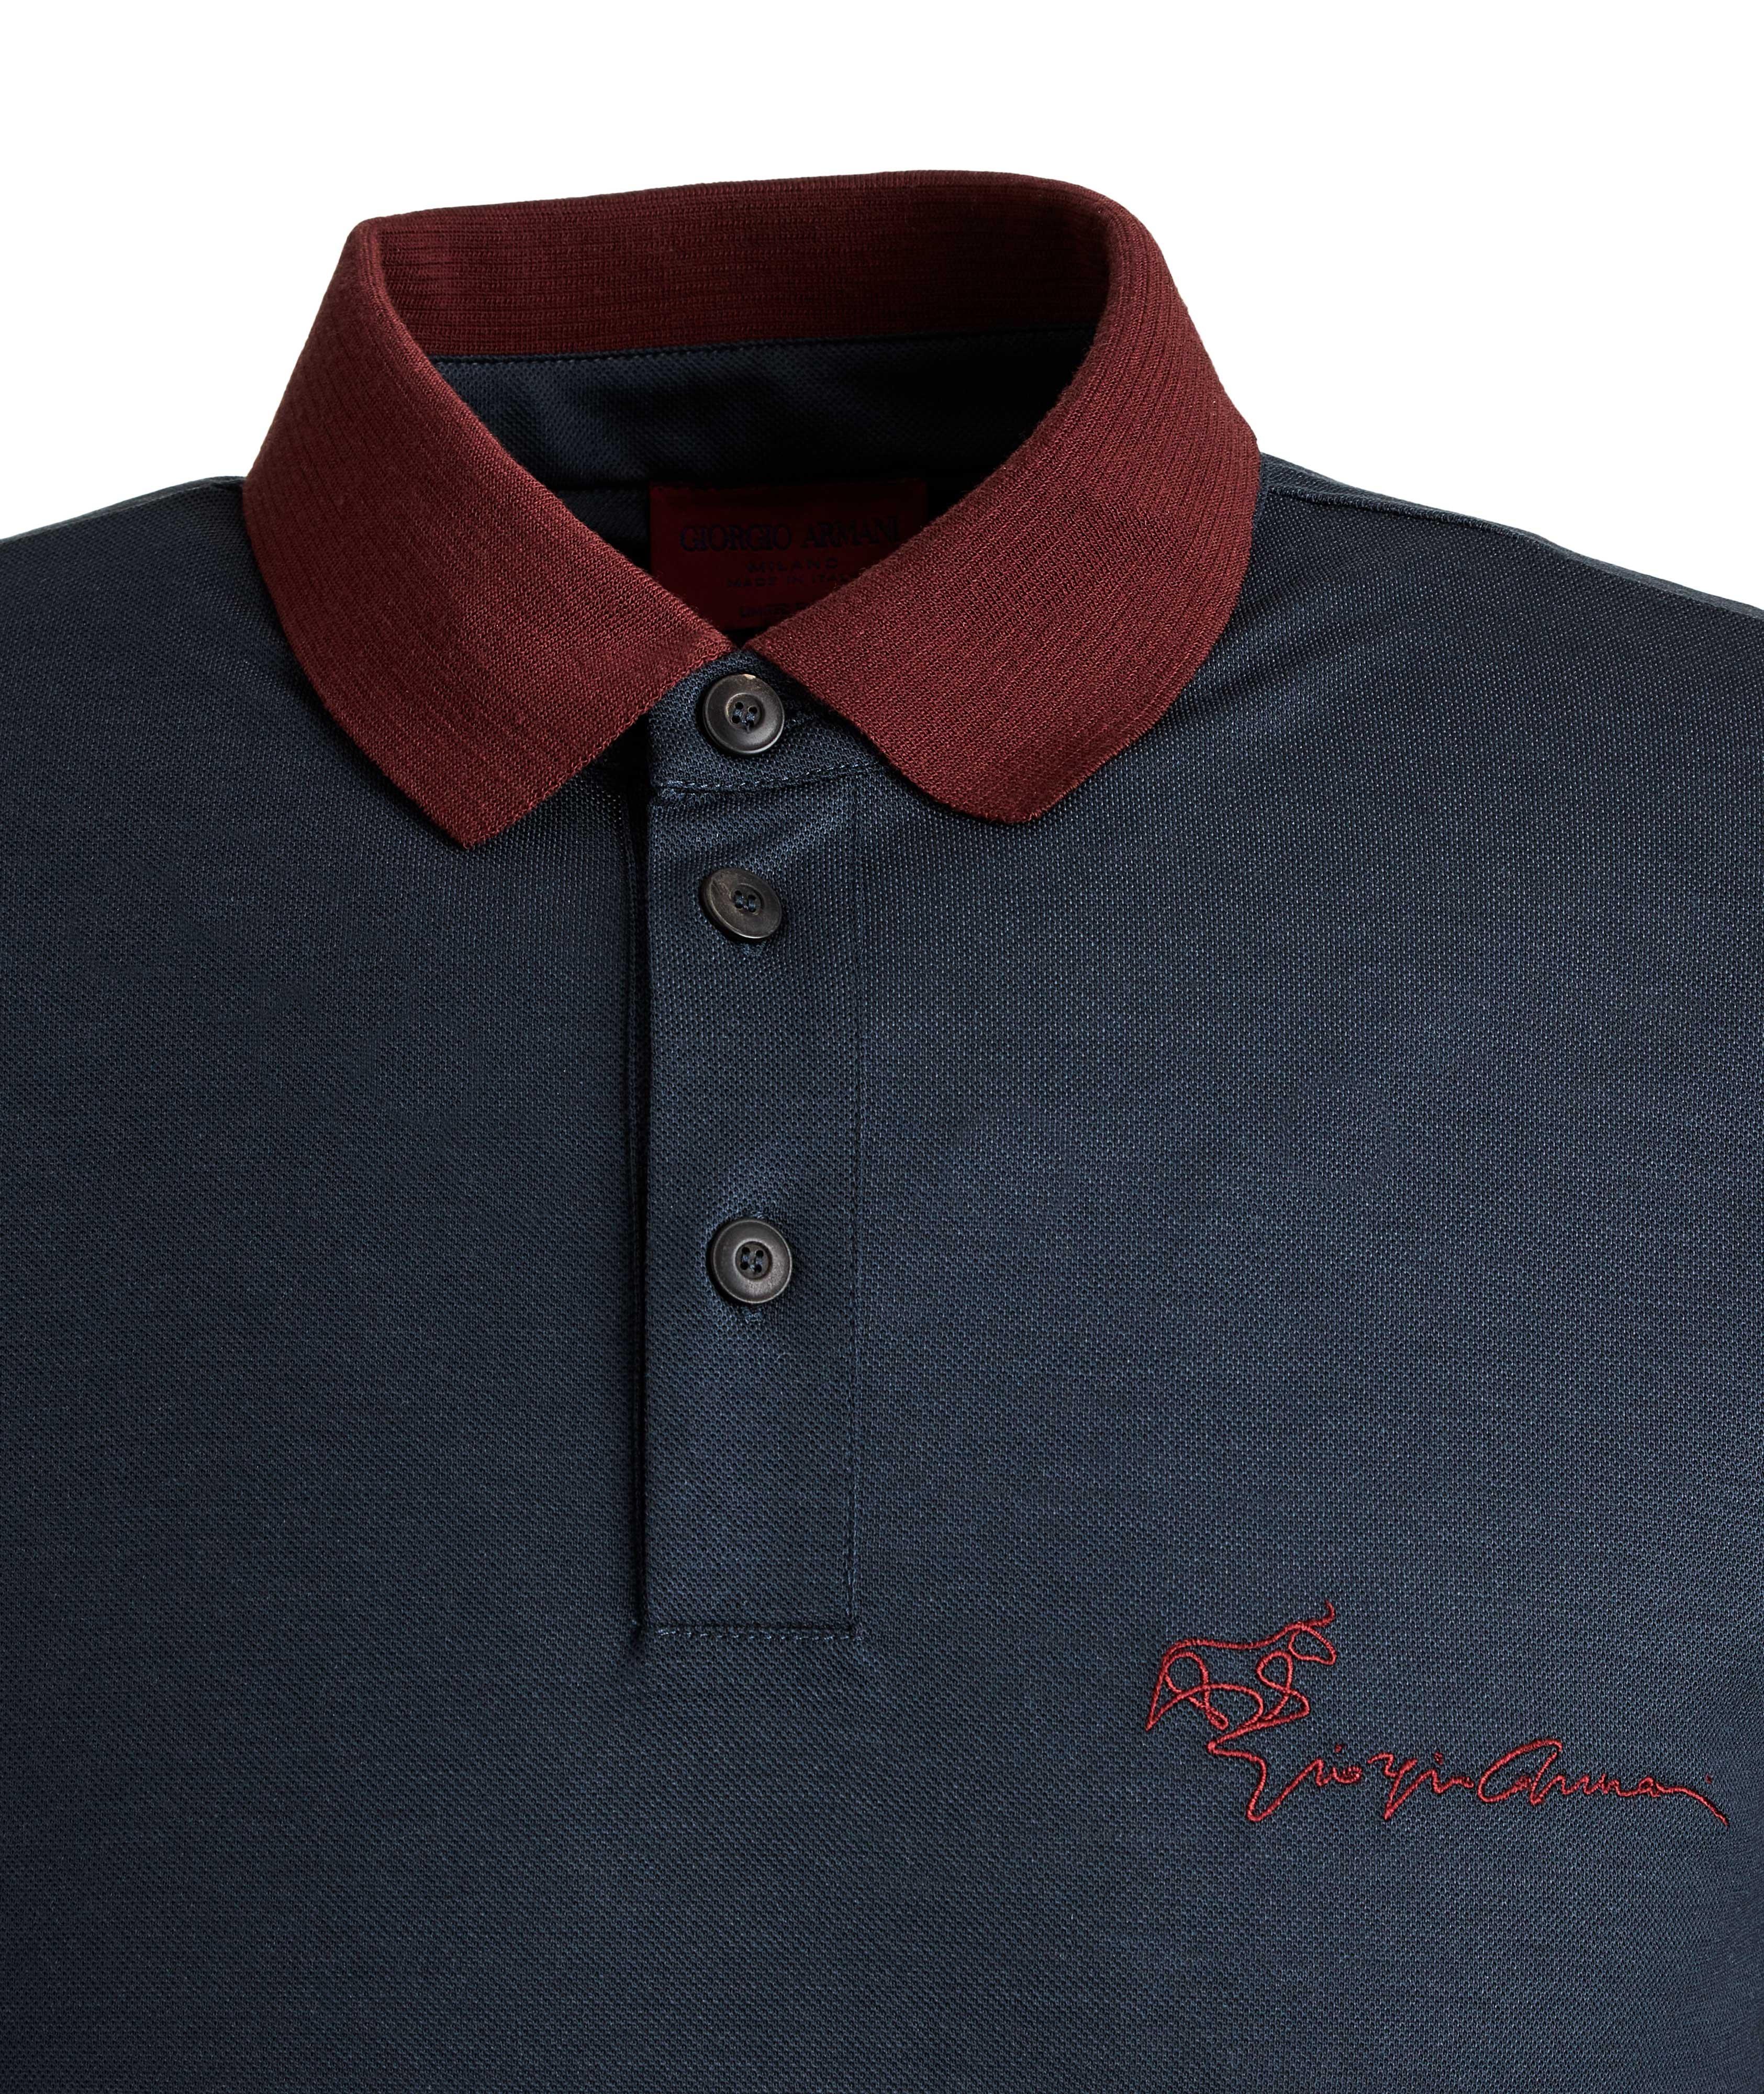 Limited Edition Piqué Virgin Wool Polo image 1